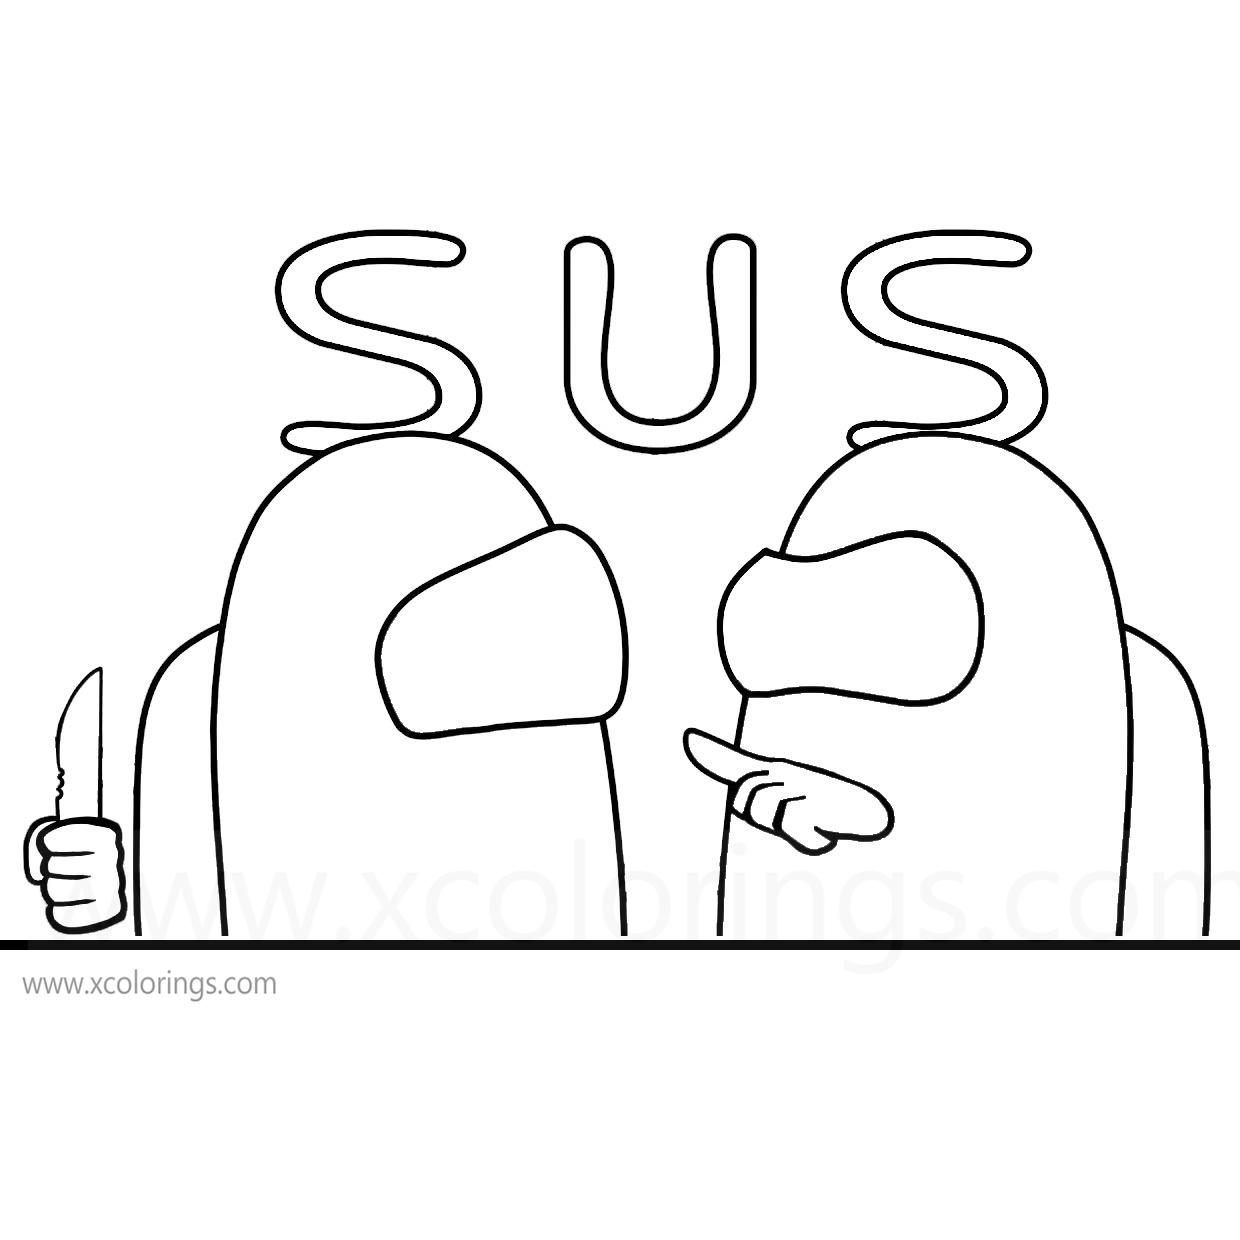 Among Us Coloring Pages SUS Impostor - XColorings.com